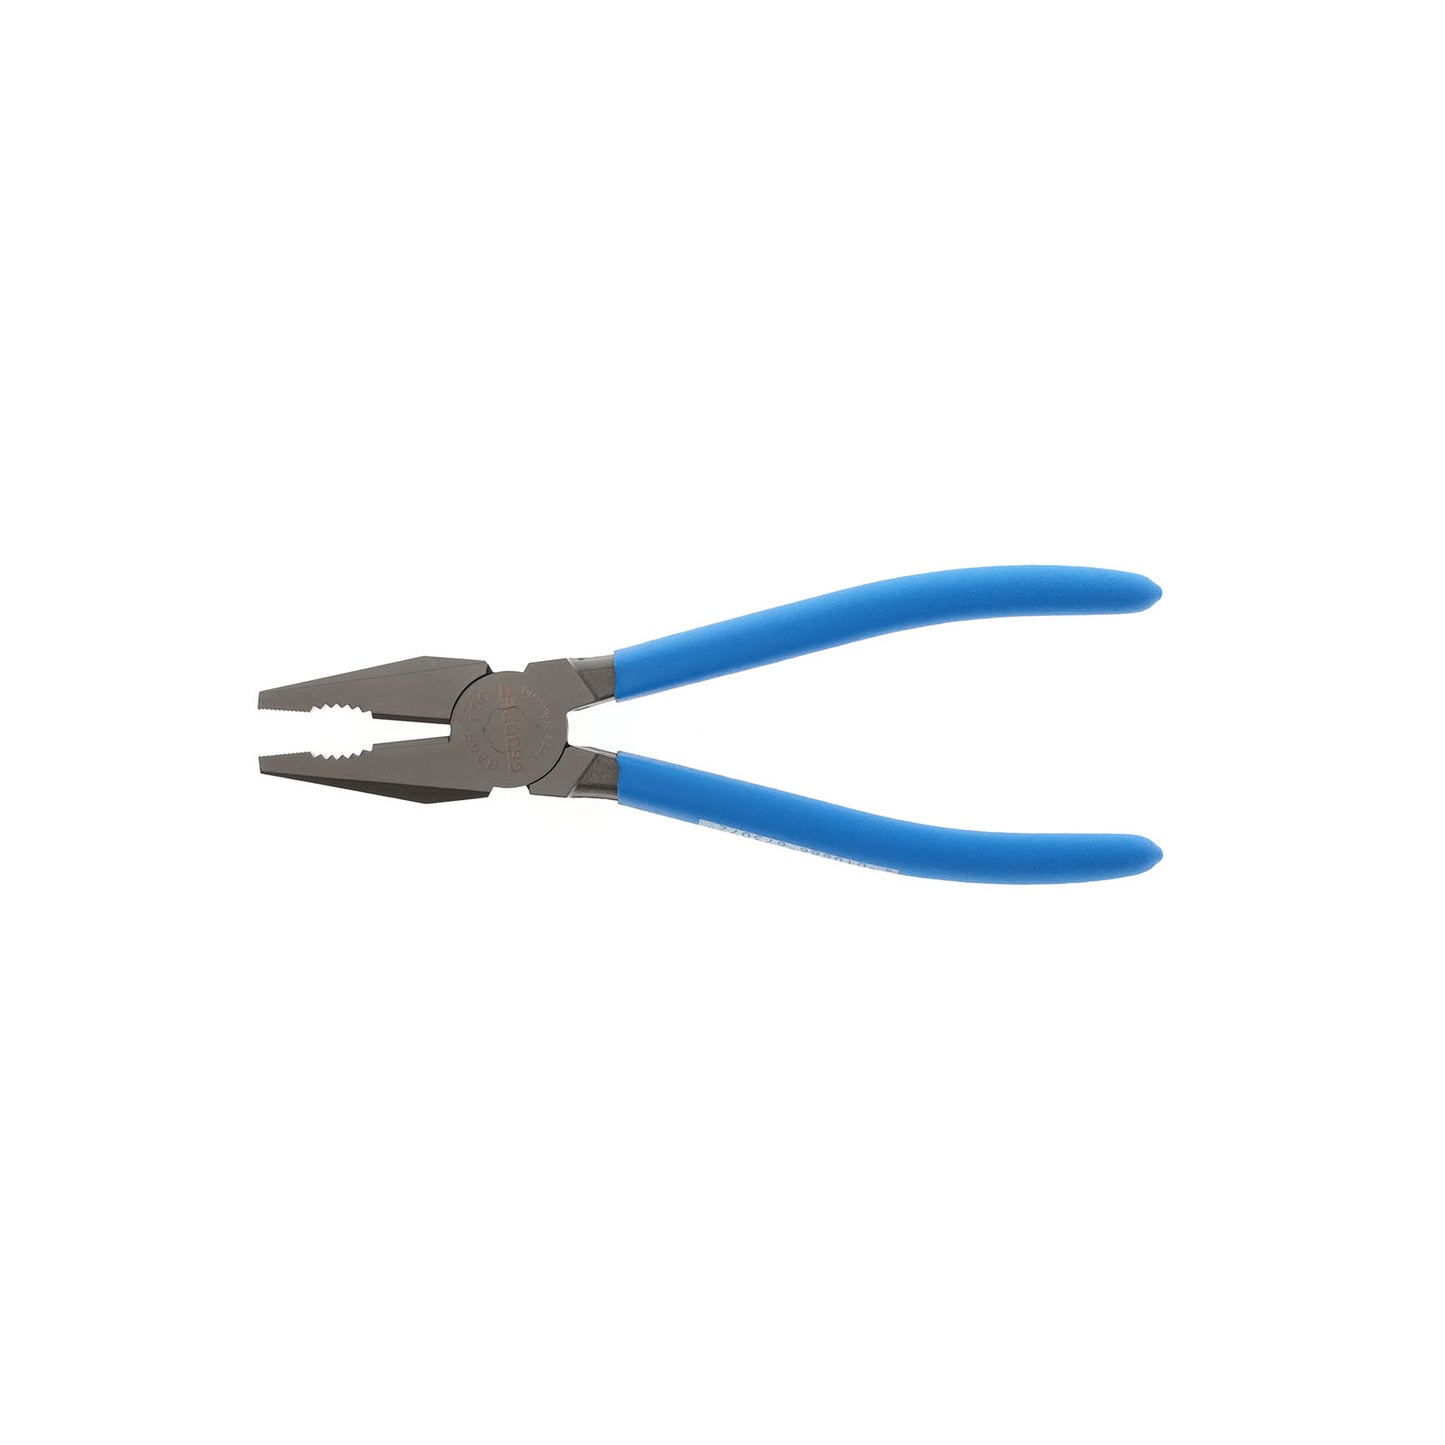 GEDORE 8245-200 TL - Universal pliers 200 mm (6730720)